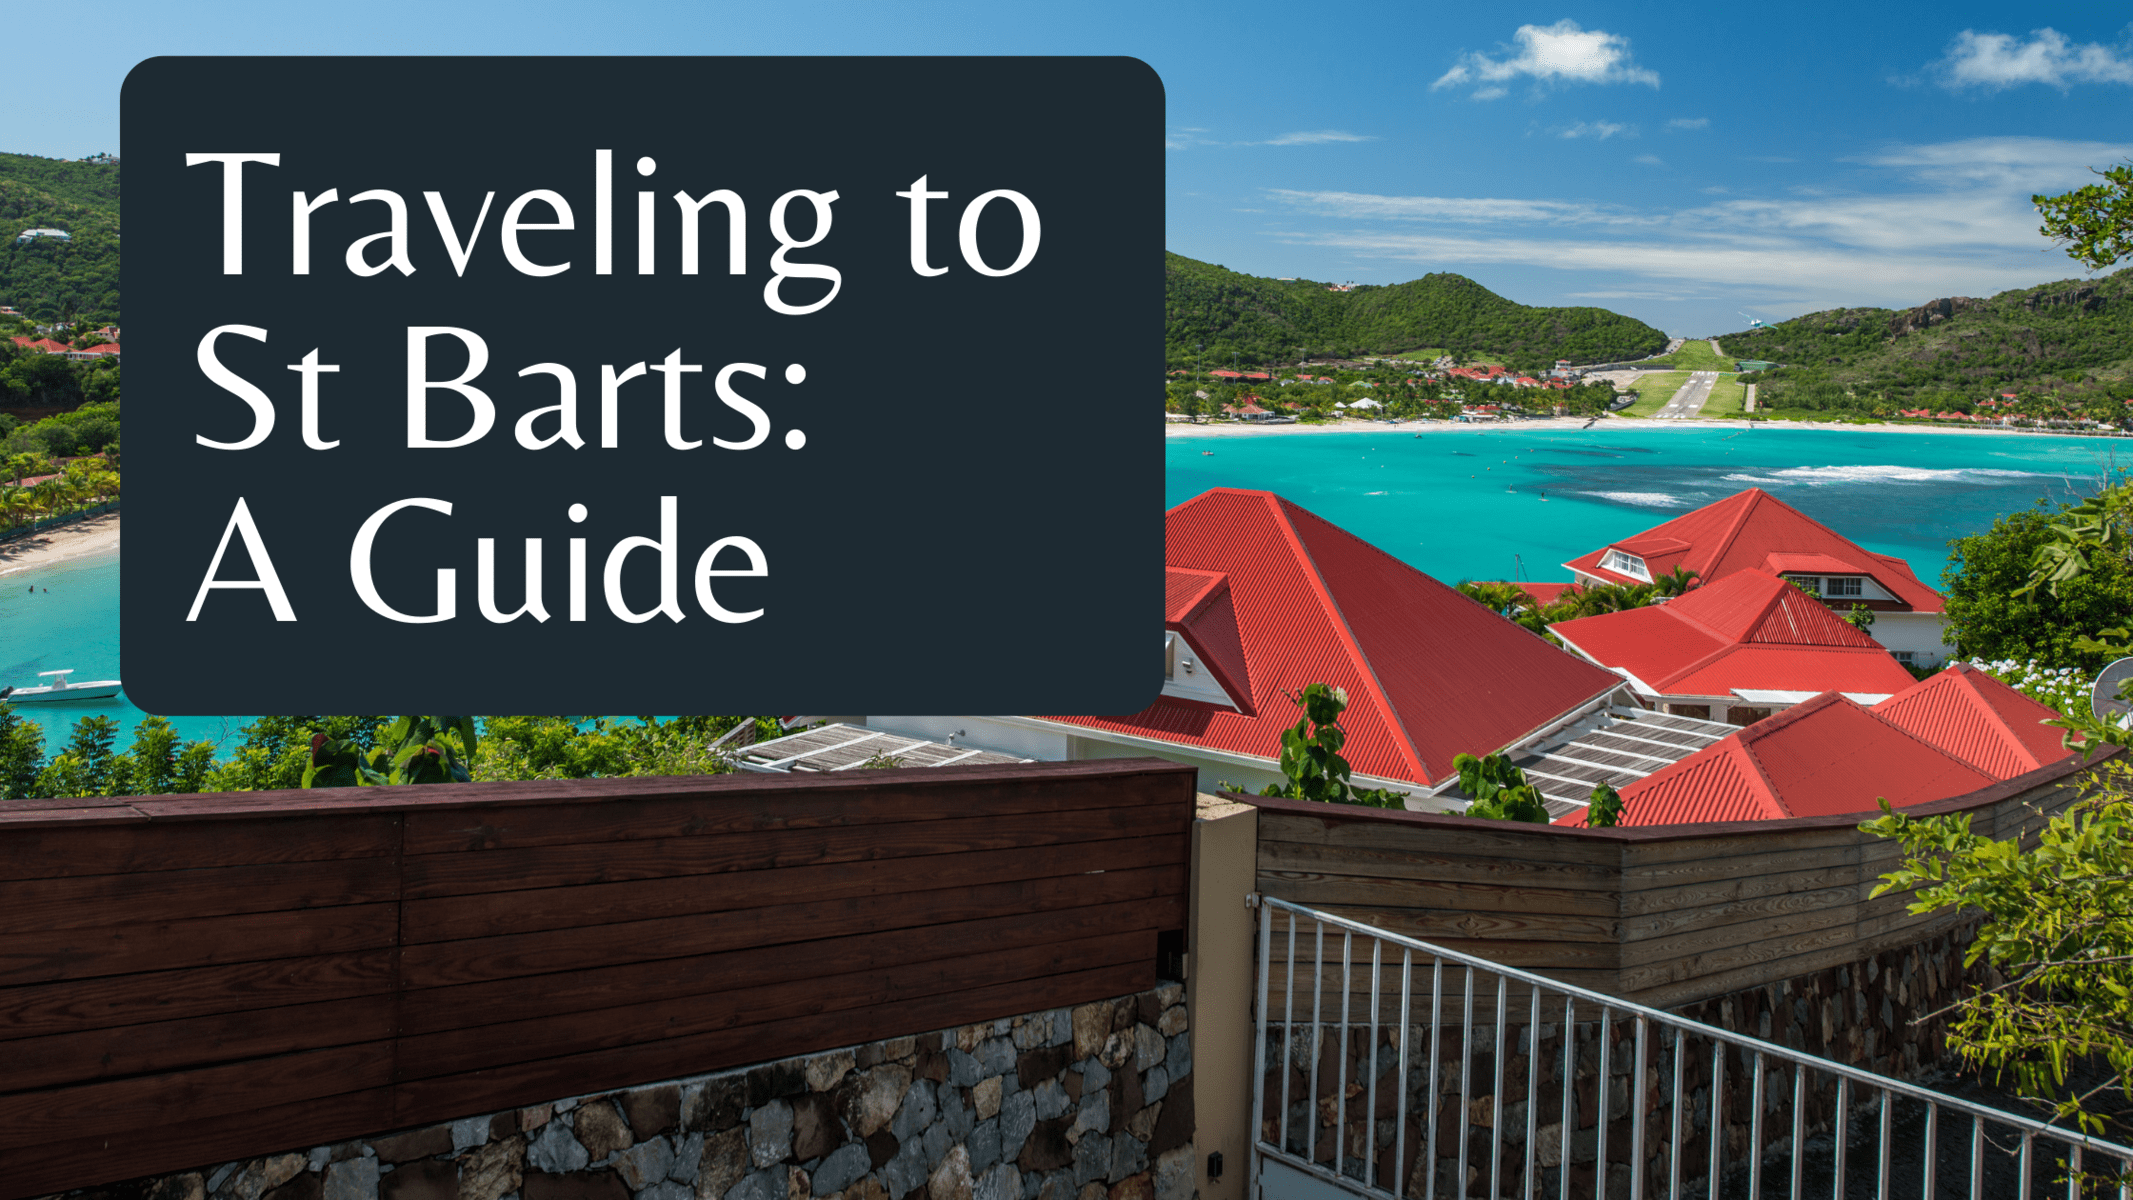 St. Barths Hotels - The Insider's Guide